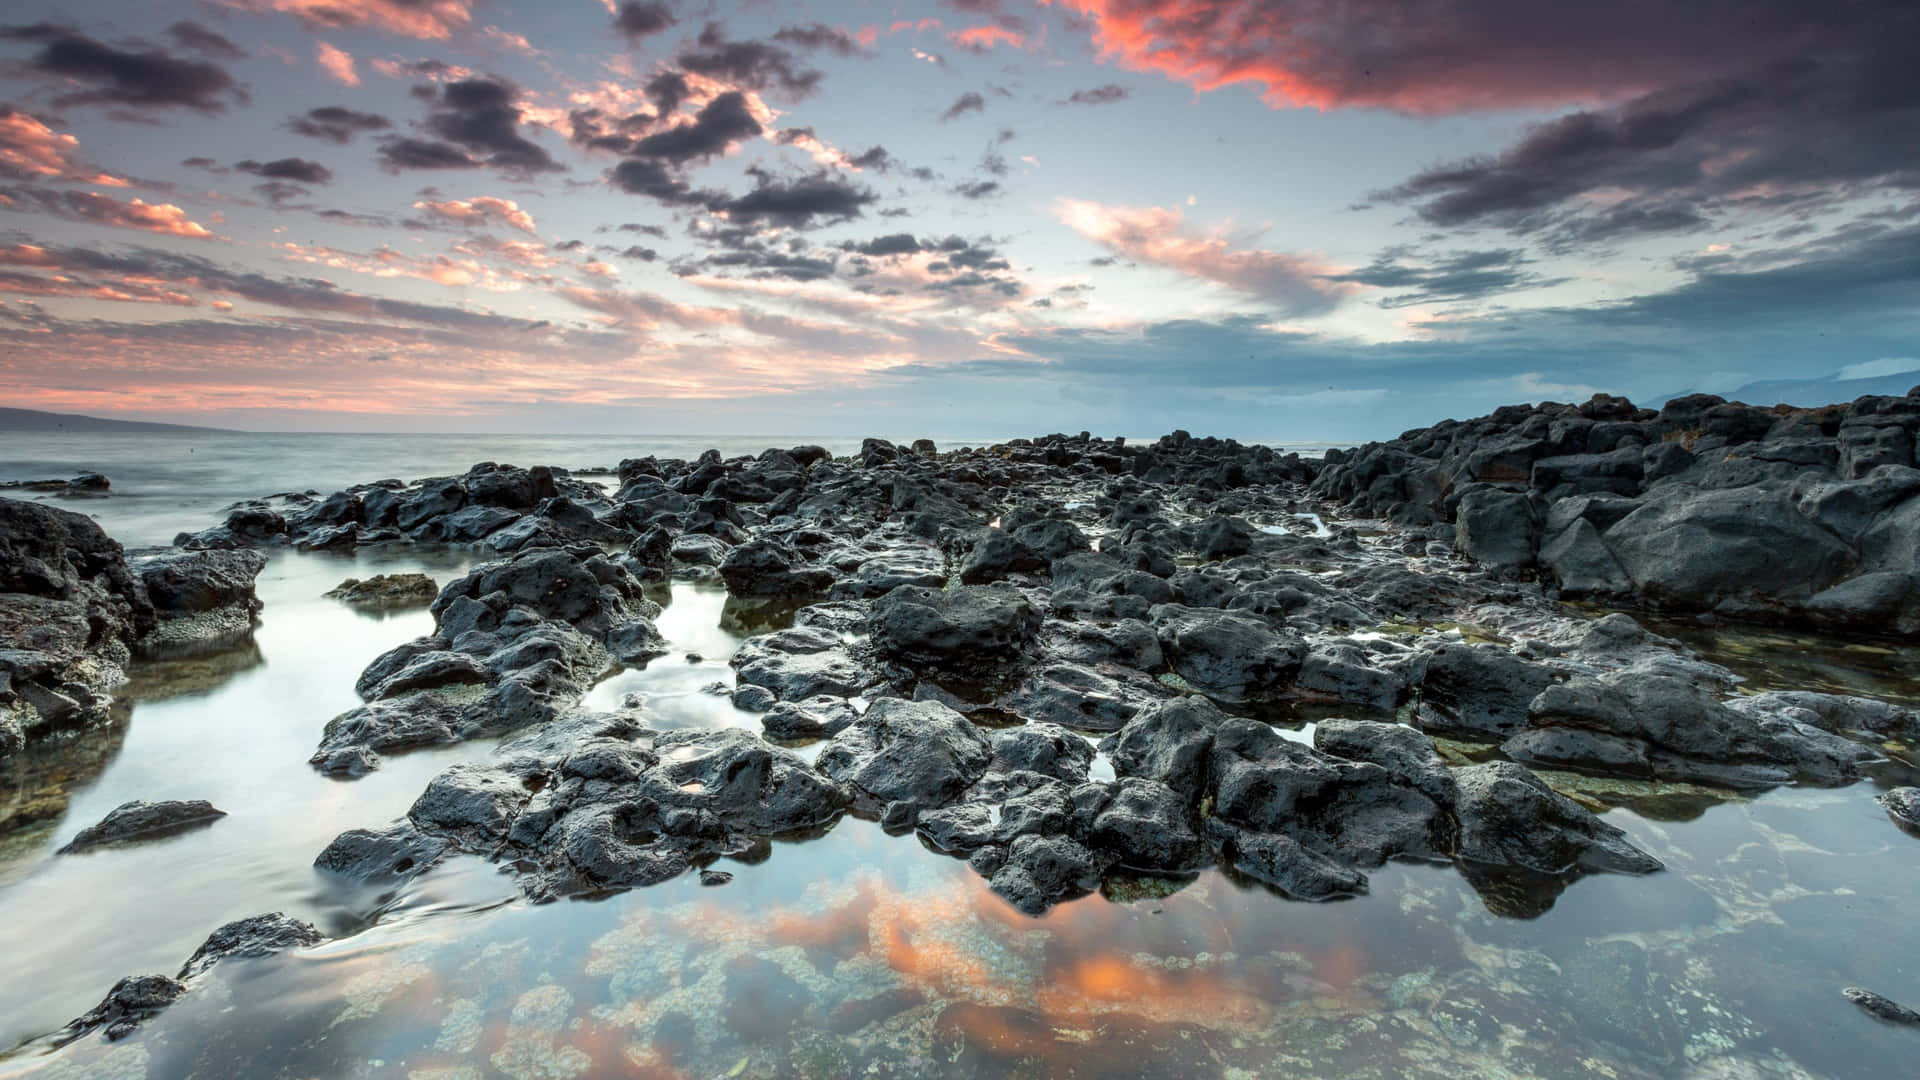 a rocky shore with a sunset sky